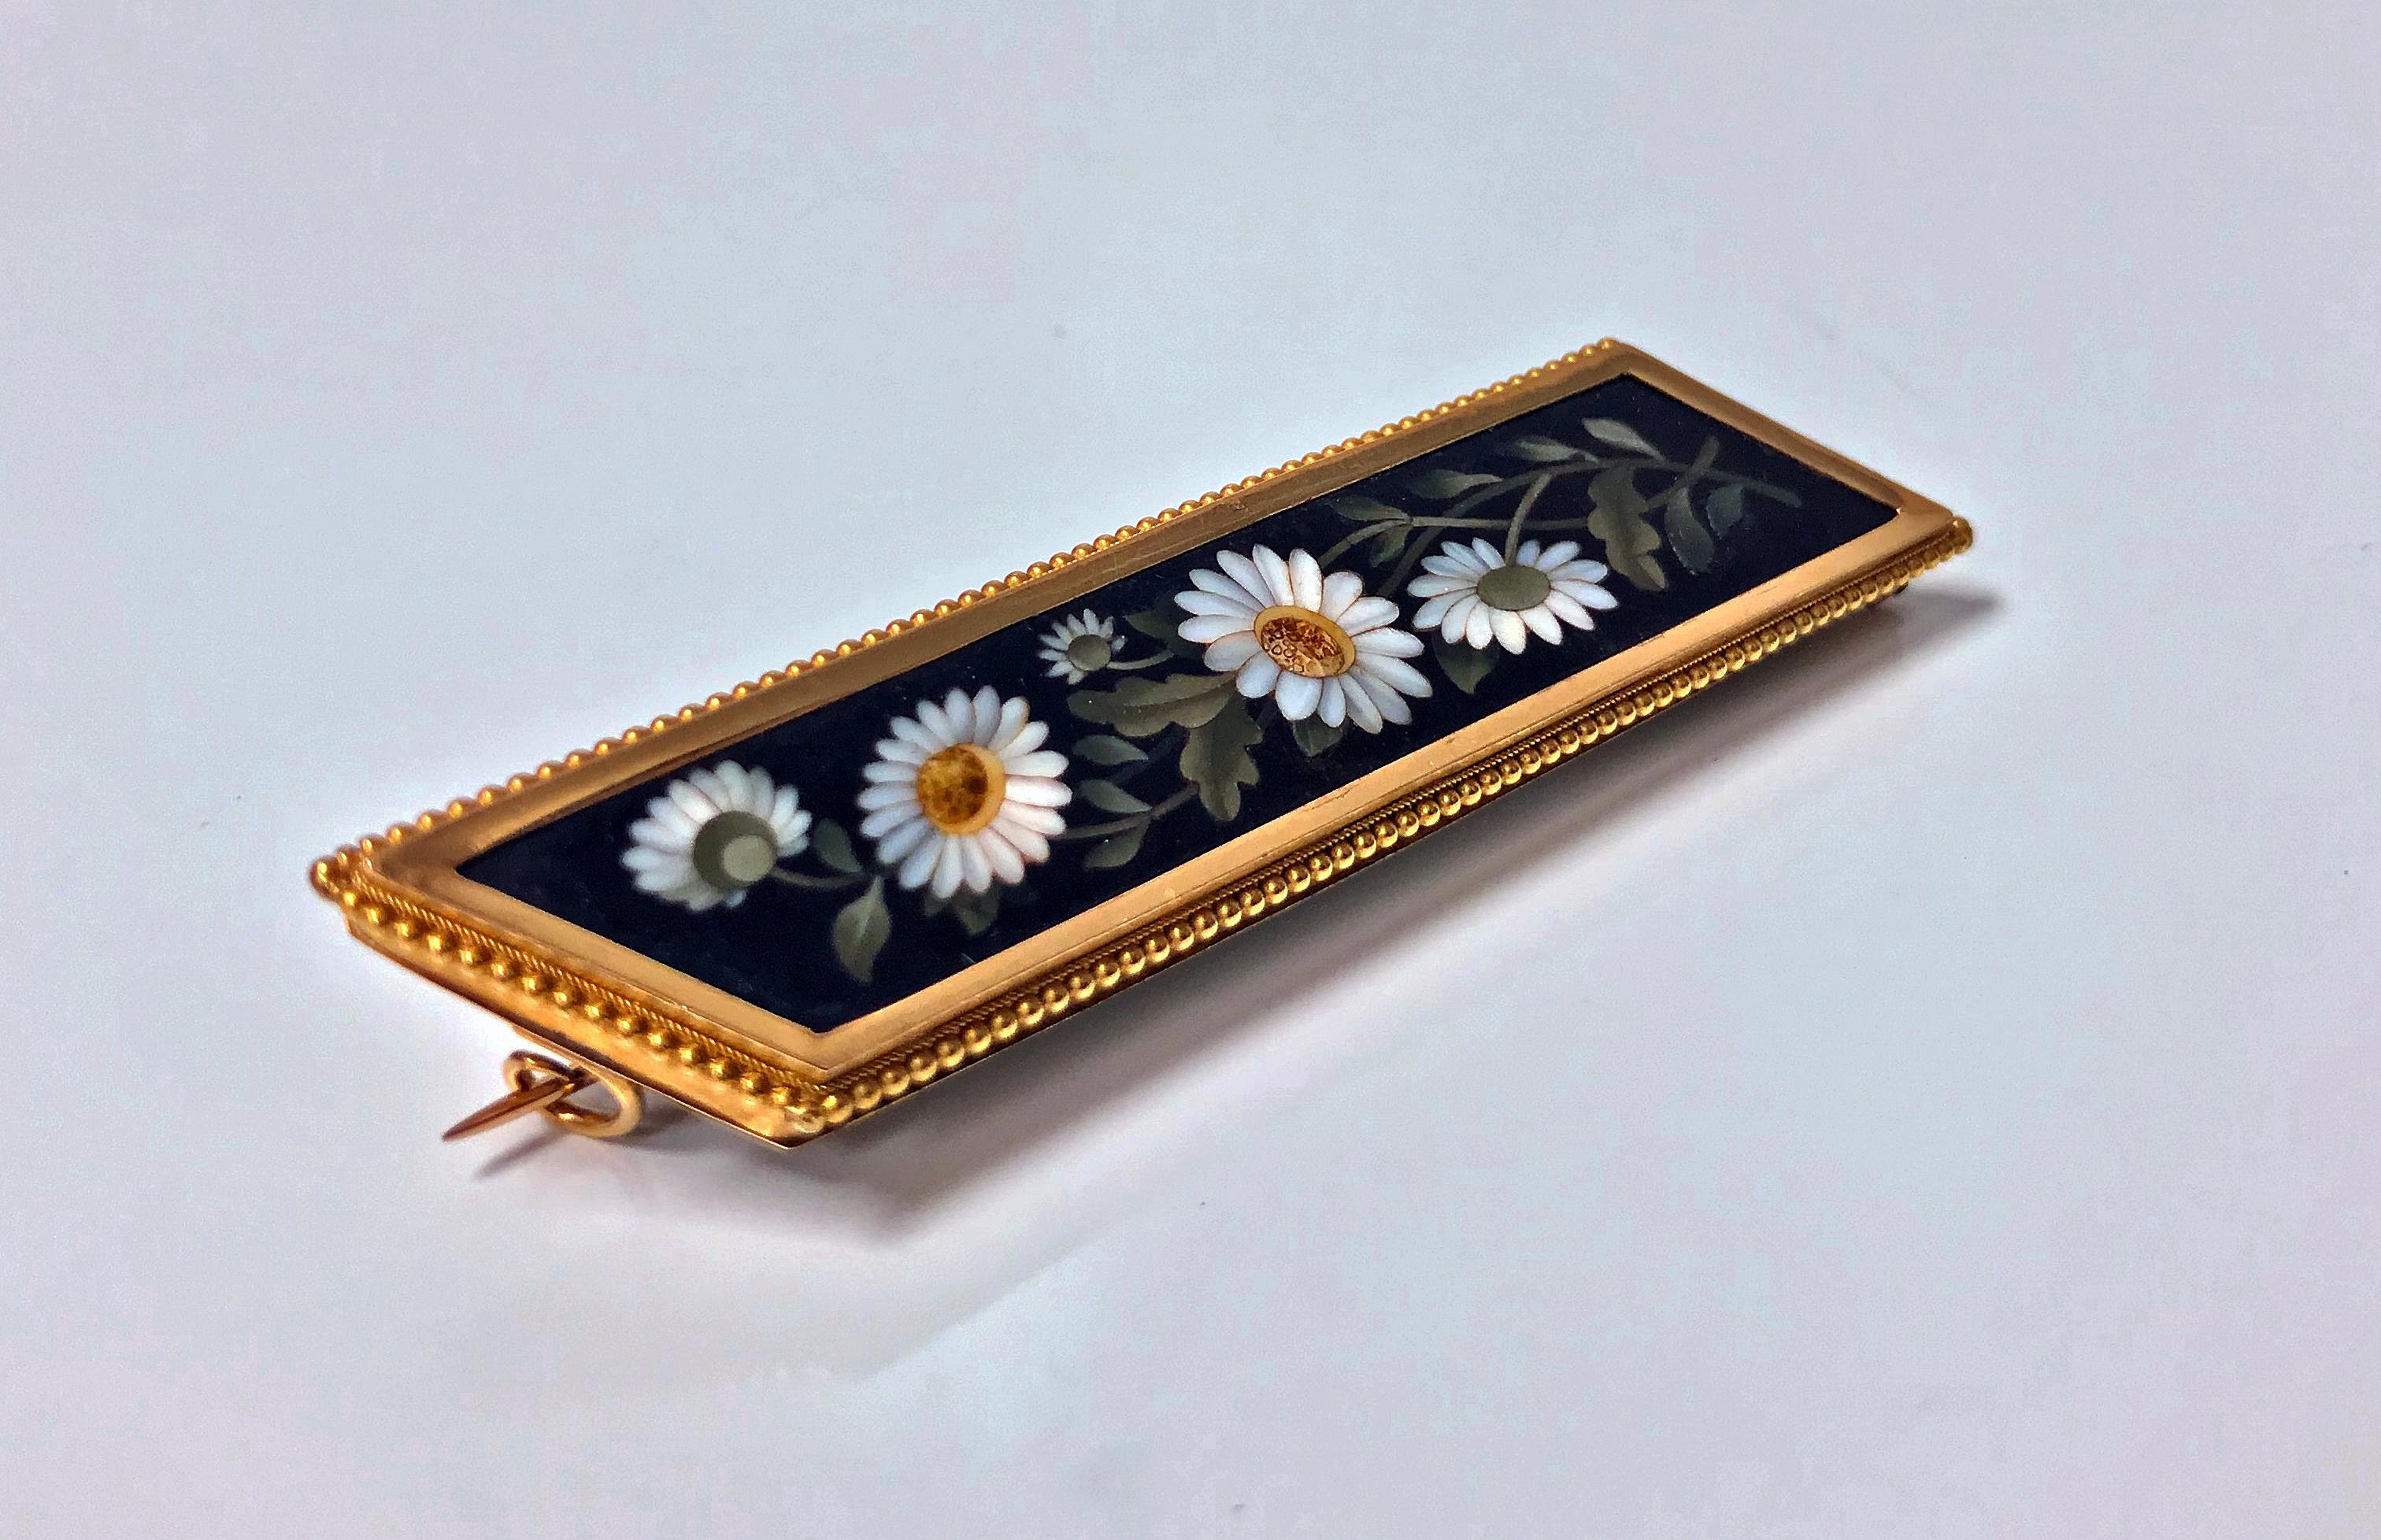 18K Gold Pietra Dura Brooch Pin, Italy C.1875. The quadrilateral shape, fine pietra dura floral white, green, and yellow sunflower inlay colors, the surround very fine gold mount of small bead border. Possible Maker’s mark on catch but  unable to